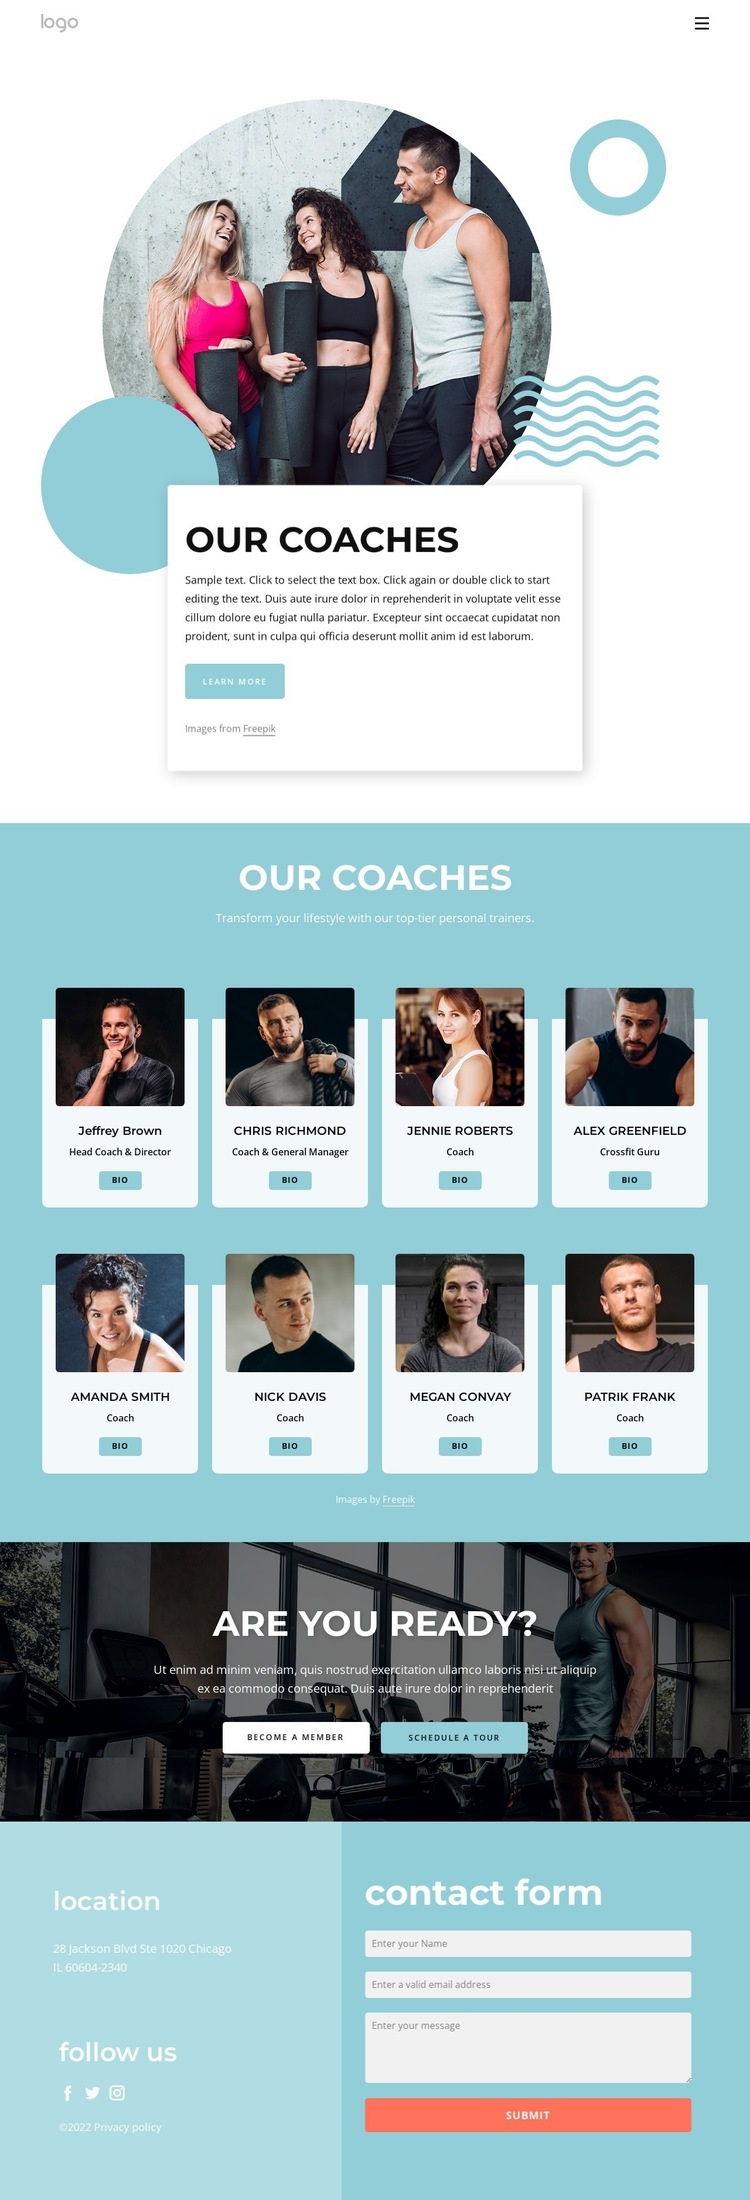 Our Coaches Wix Template Alternative